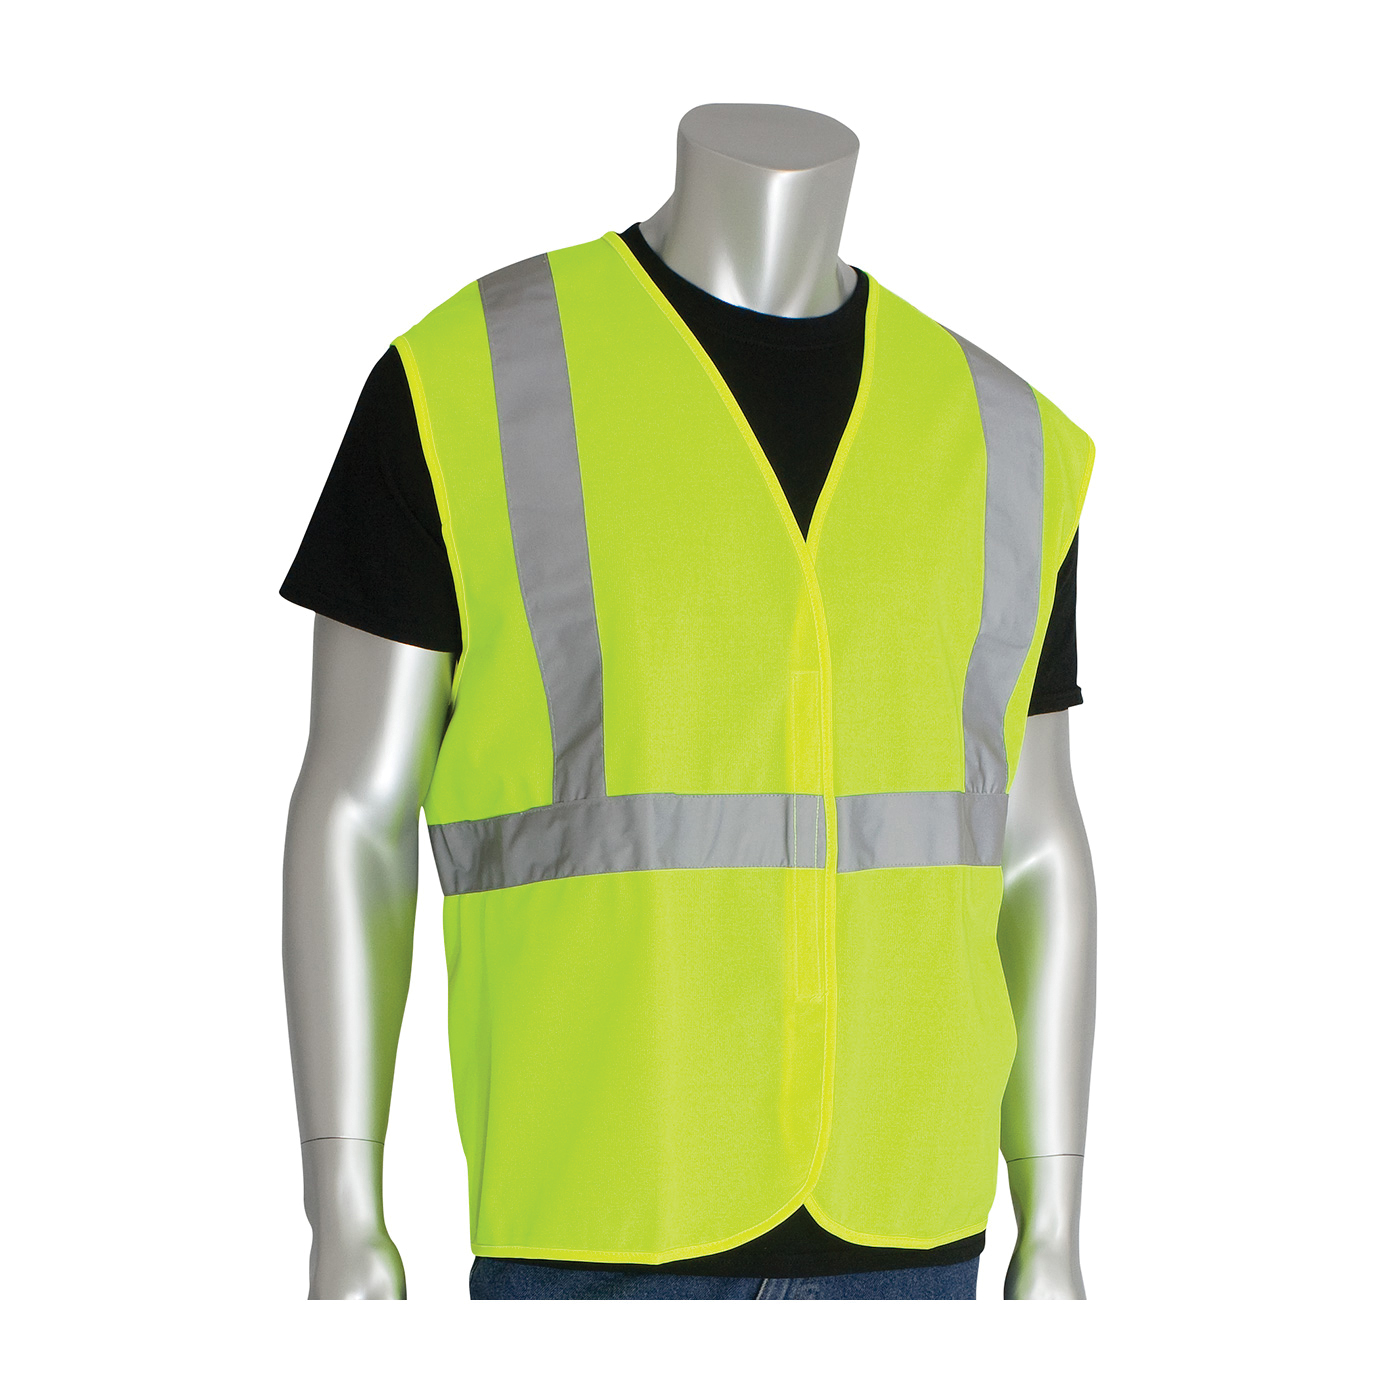 PIP® 302-WCENGLY-L Solid Vest, L, Hi-Viz Lime Yellow, Polyester, Hook and Loop Closure, ANSI Class: Class 2, Specifications Met: ANSI 107 Type R